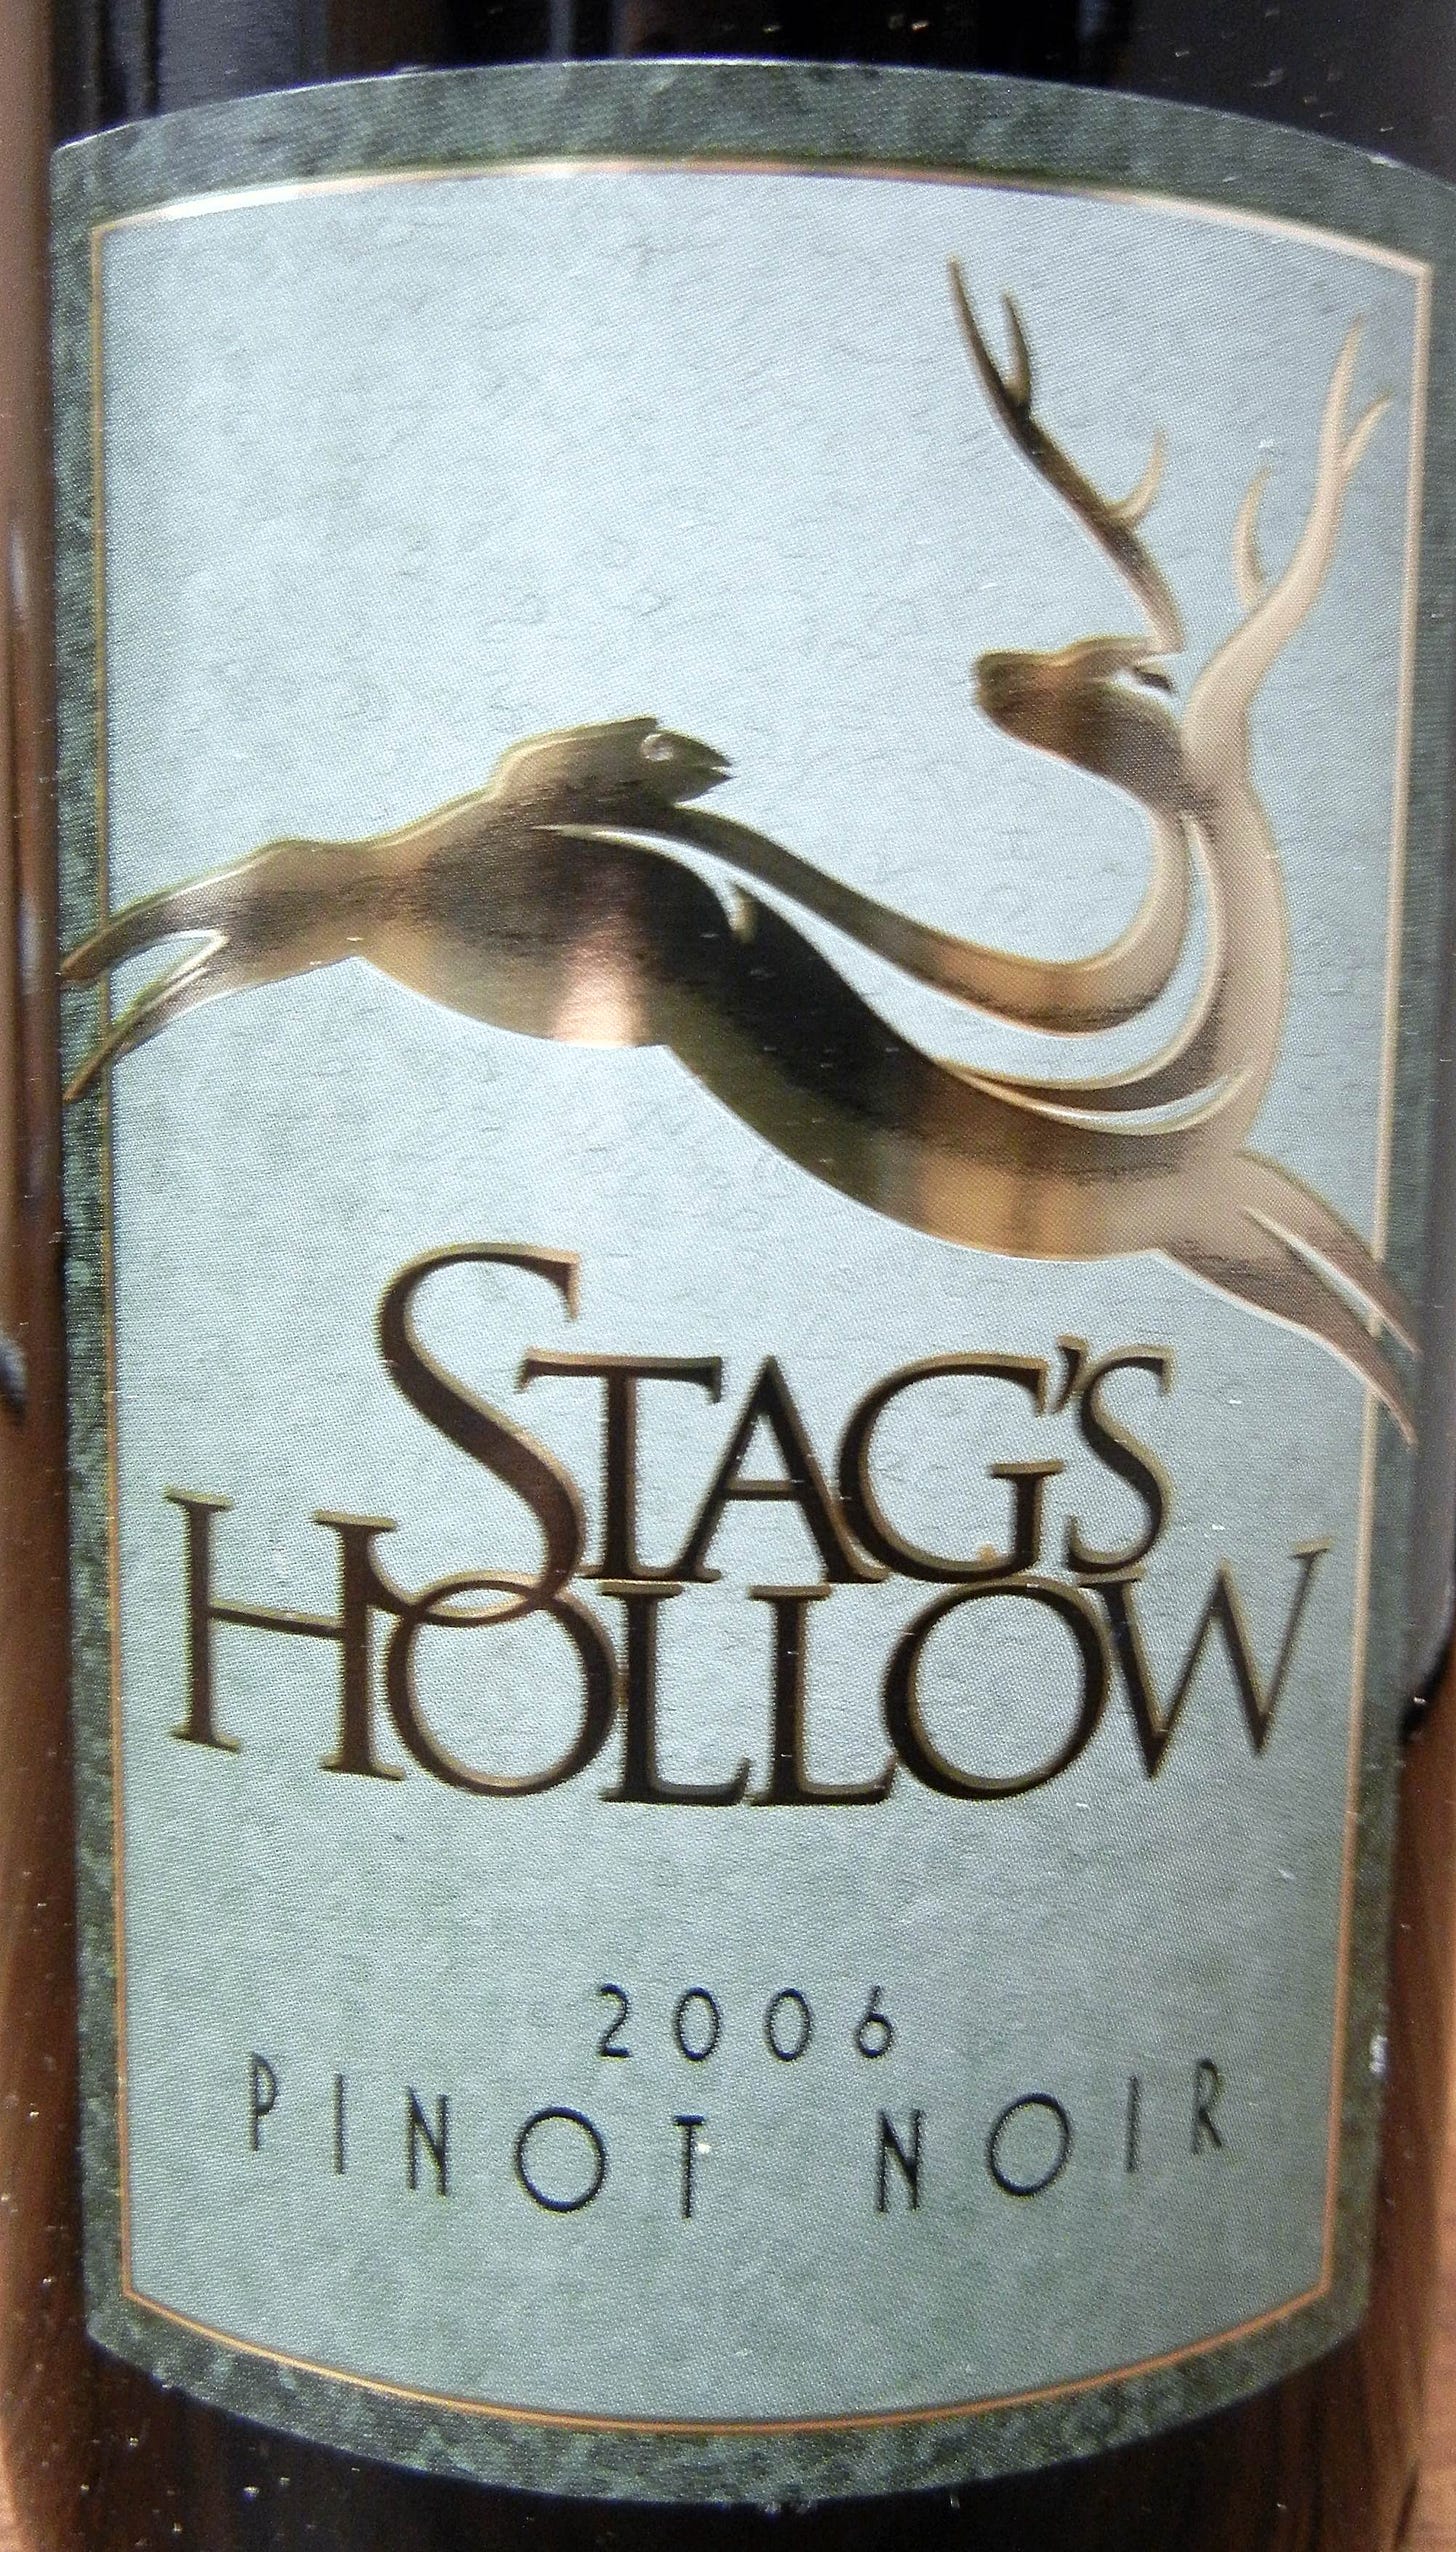 Stag's Hollow Pinot Noir 2006 Label - BC Pinot Noir Tasting Review 5